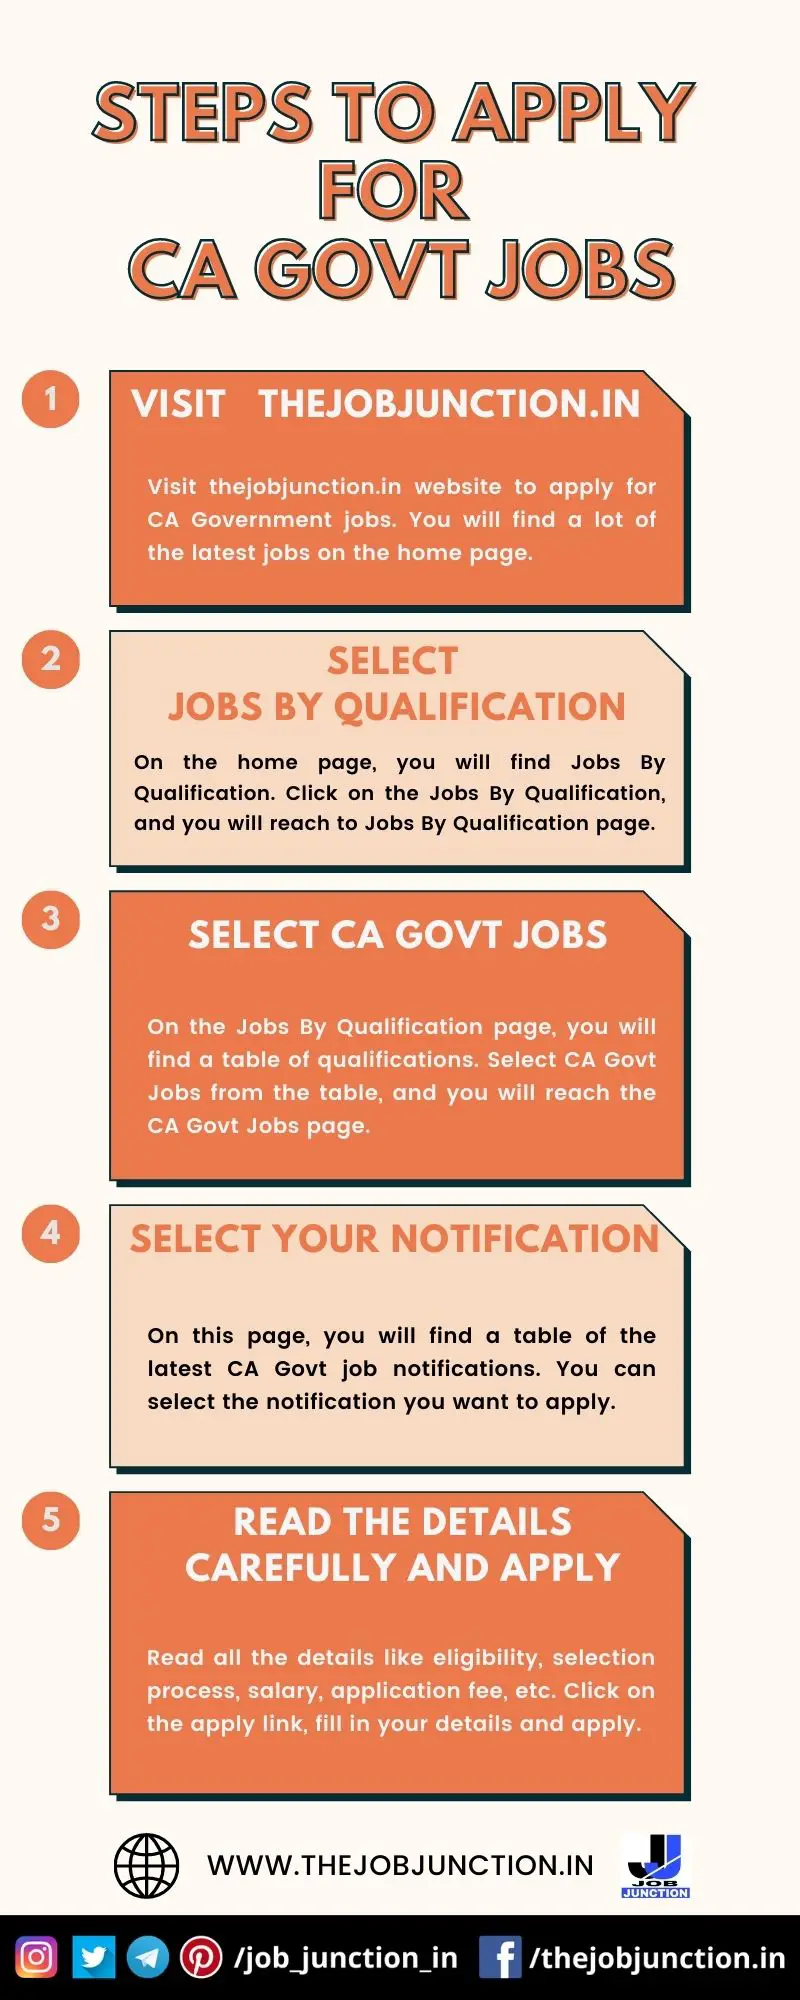 STEPS TO APPLY FOR CA GOVT JOBS